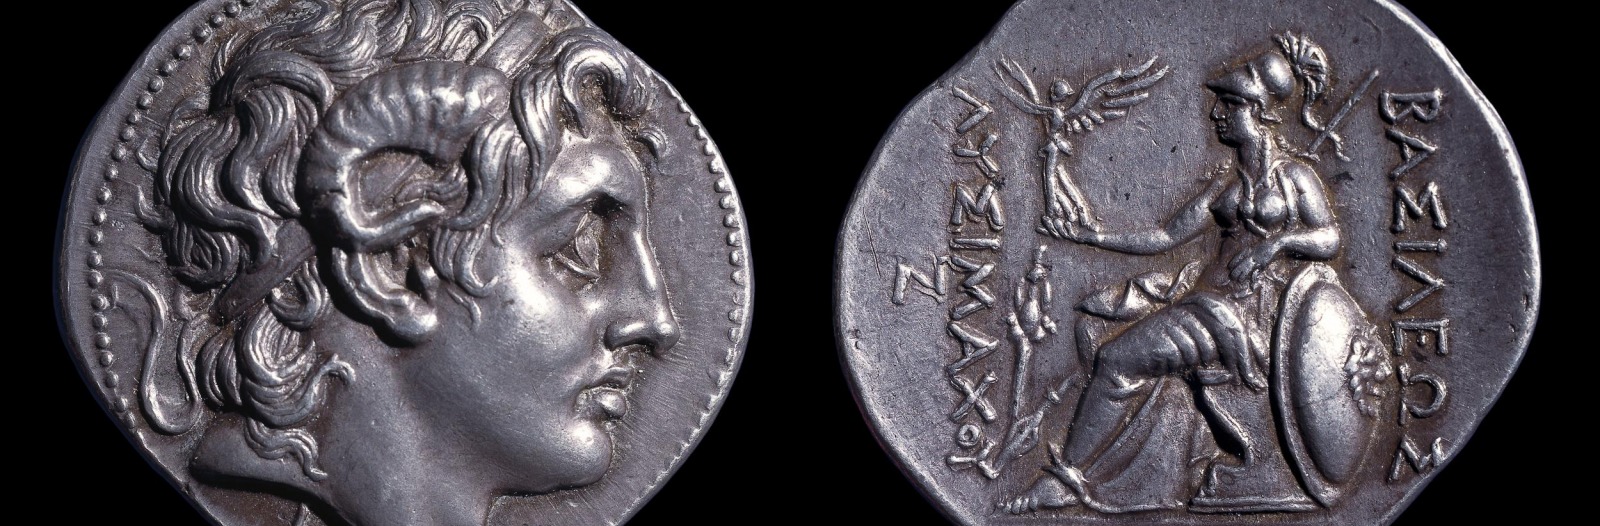 Two sides of an ancient coin: a third-century BCE coin depicting, on one side, Alexander the Great as the Egyptian god Amun and, on the other, the Greek goddess Athena holding the goddess Nike (Victory)